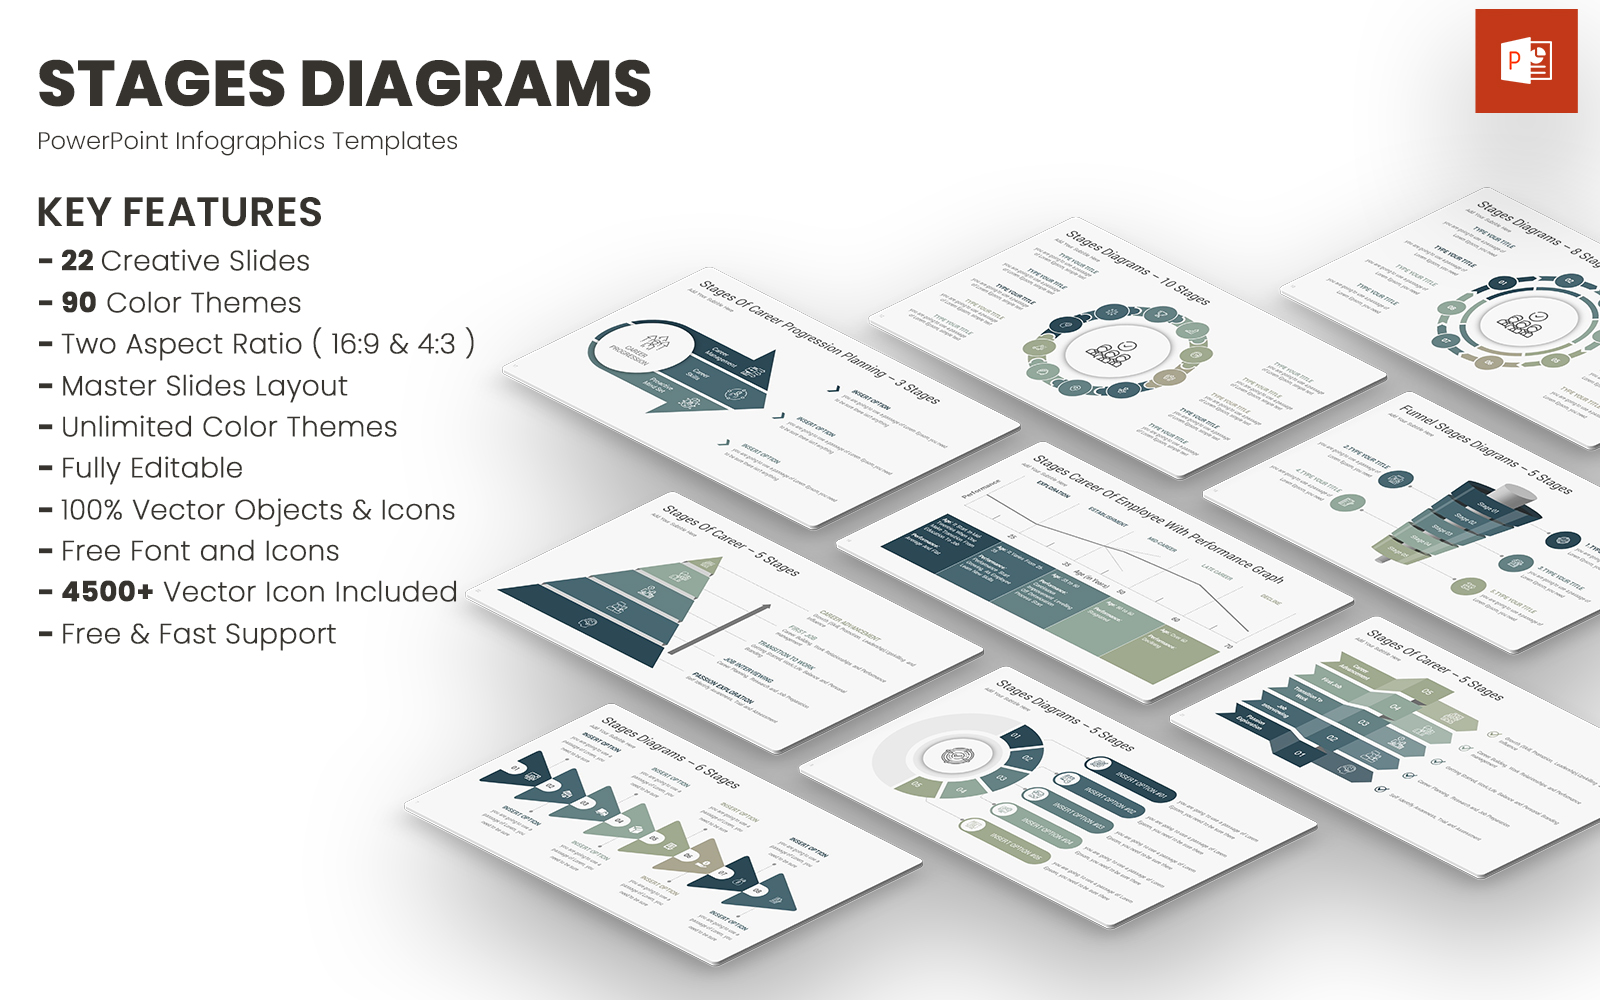 Stages Diagrams PowerPoint Templates